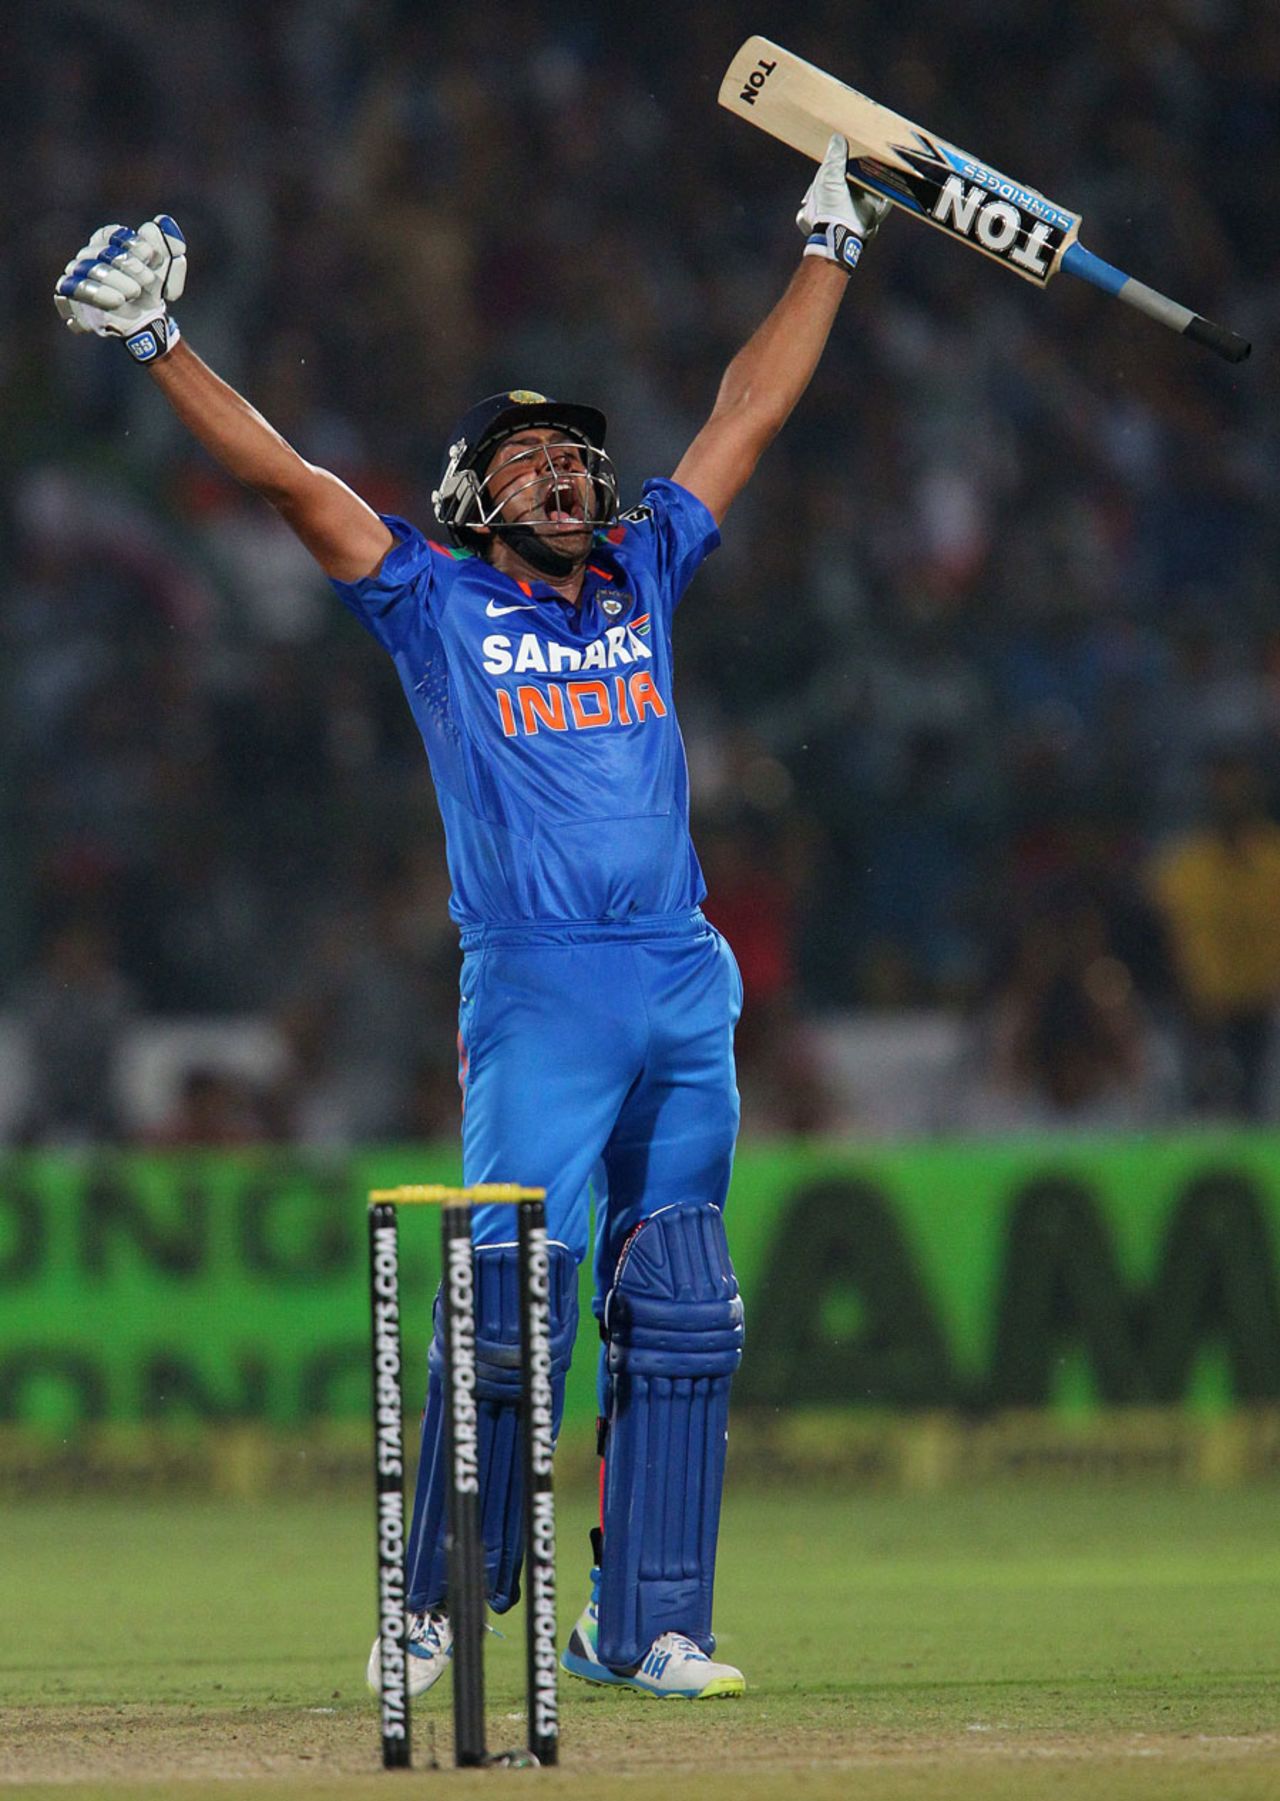 Rohit Sharma is elated after scoring his first century in three years, India v Australia, 2nd ODI, Jaipur, October 16, 2013